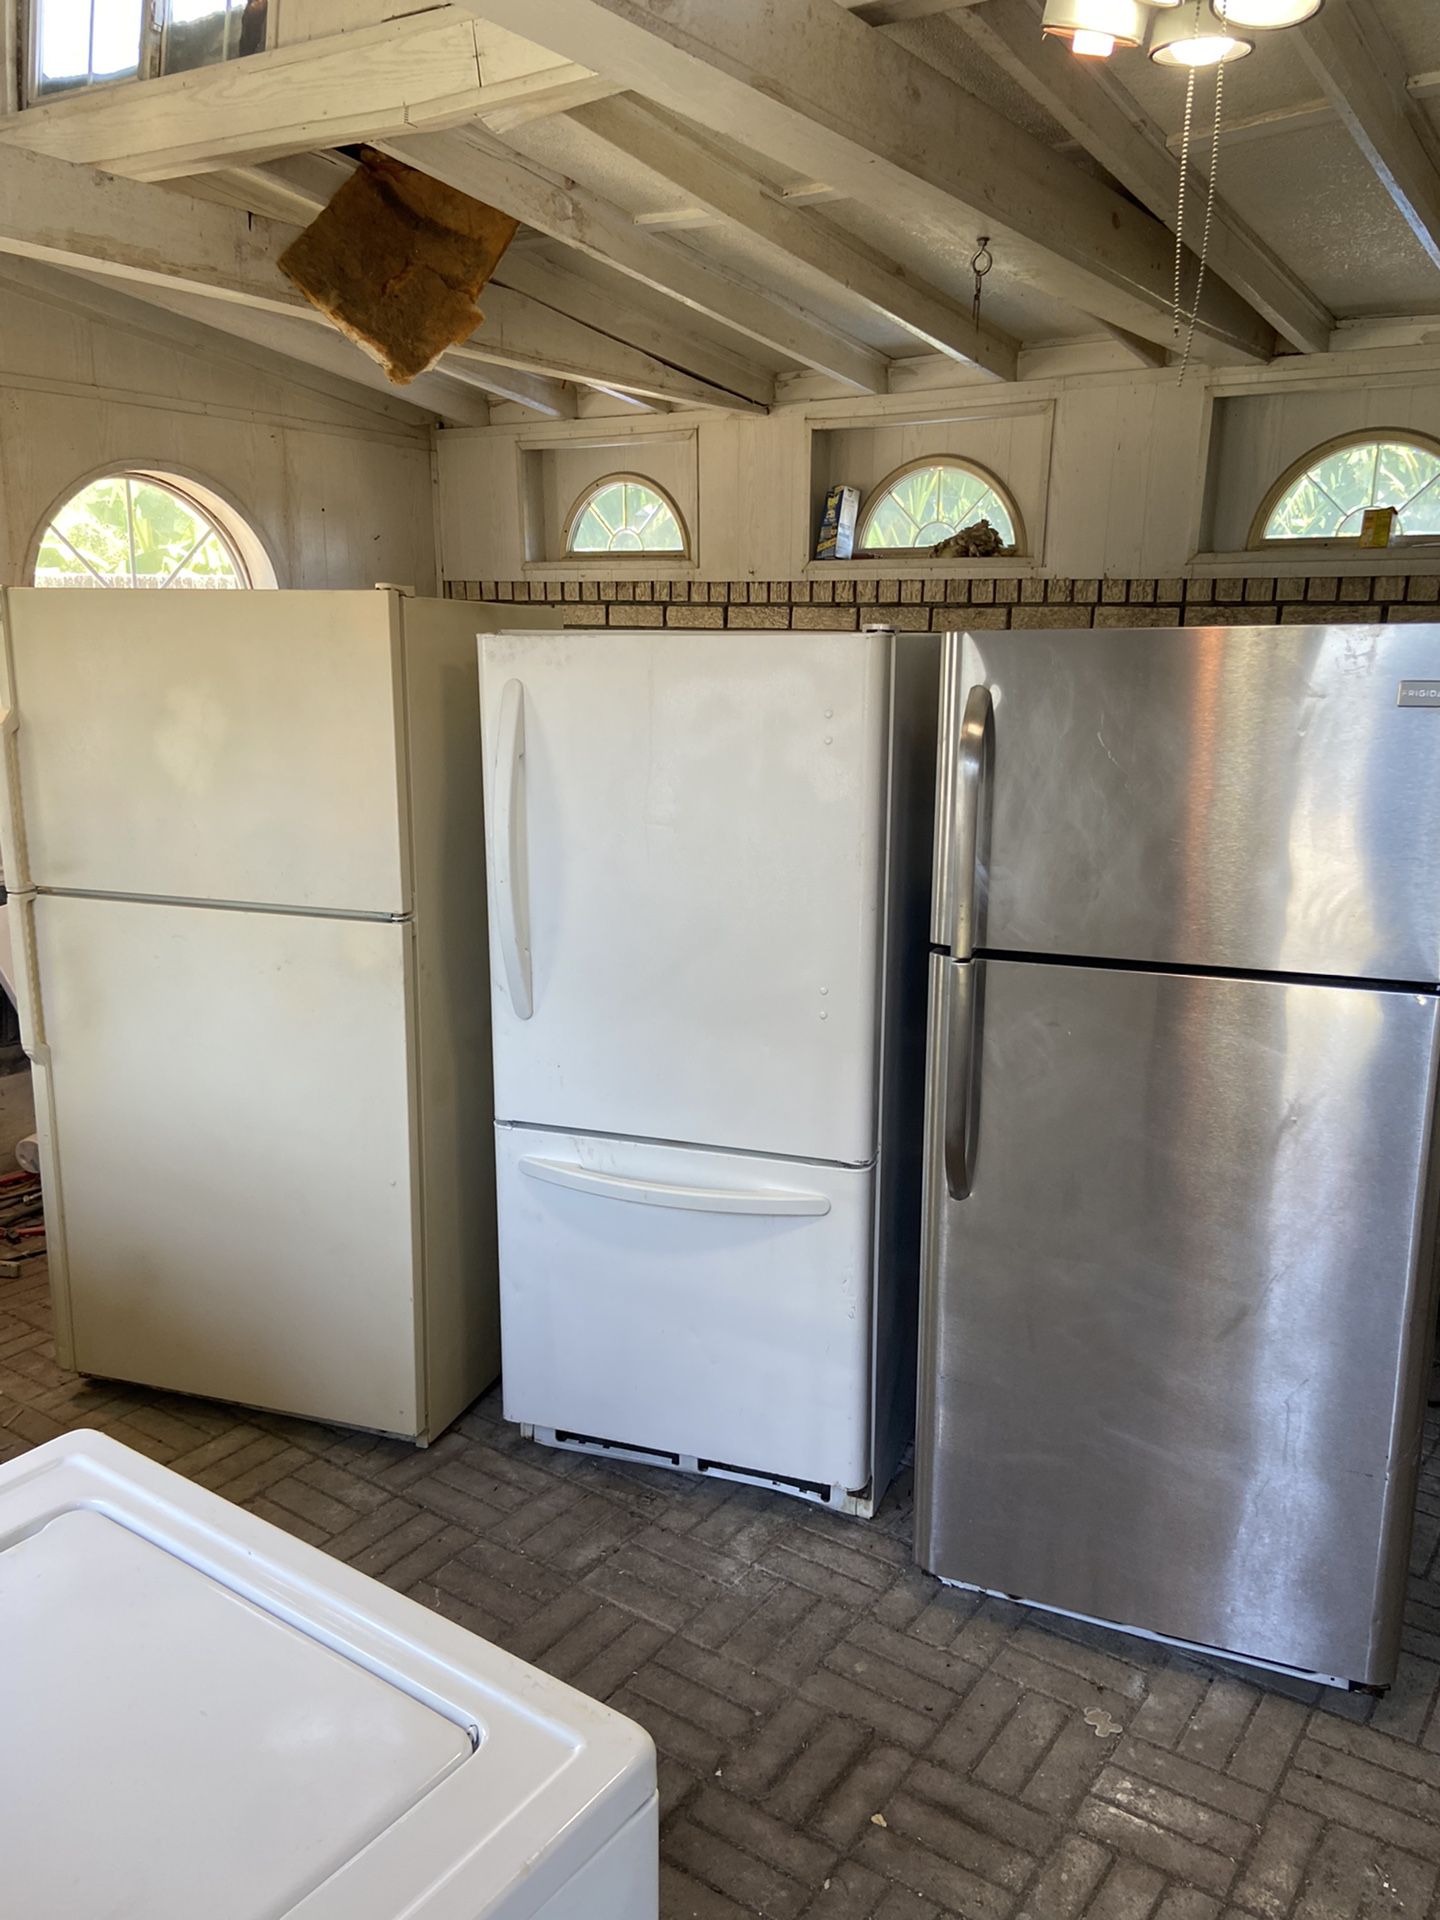 GREAT RUNNING FRIDGES! STARTING OUT AT $275 & UP . ALL HAVE BEEN CLEANED IN & OUT! IM LOCATED IN MARRERO! IM HOME NOW. COME OUT UP TO 7 PM ANYDAY.